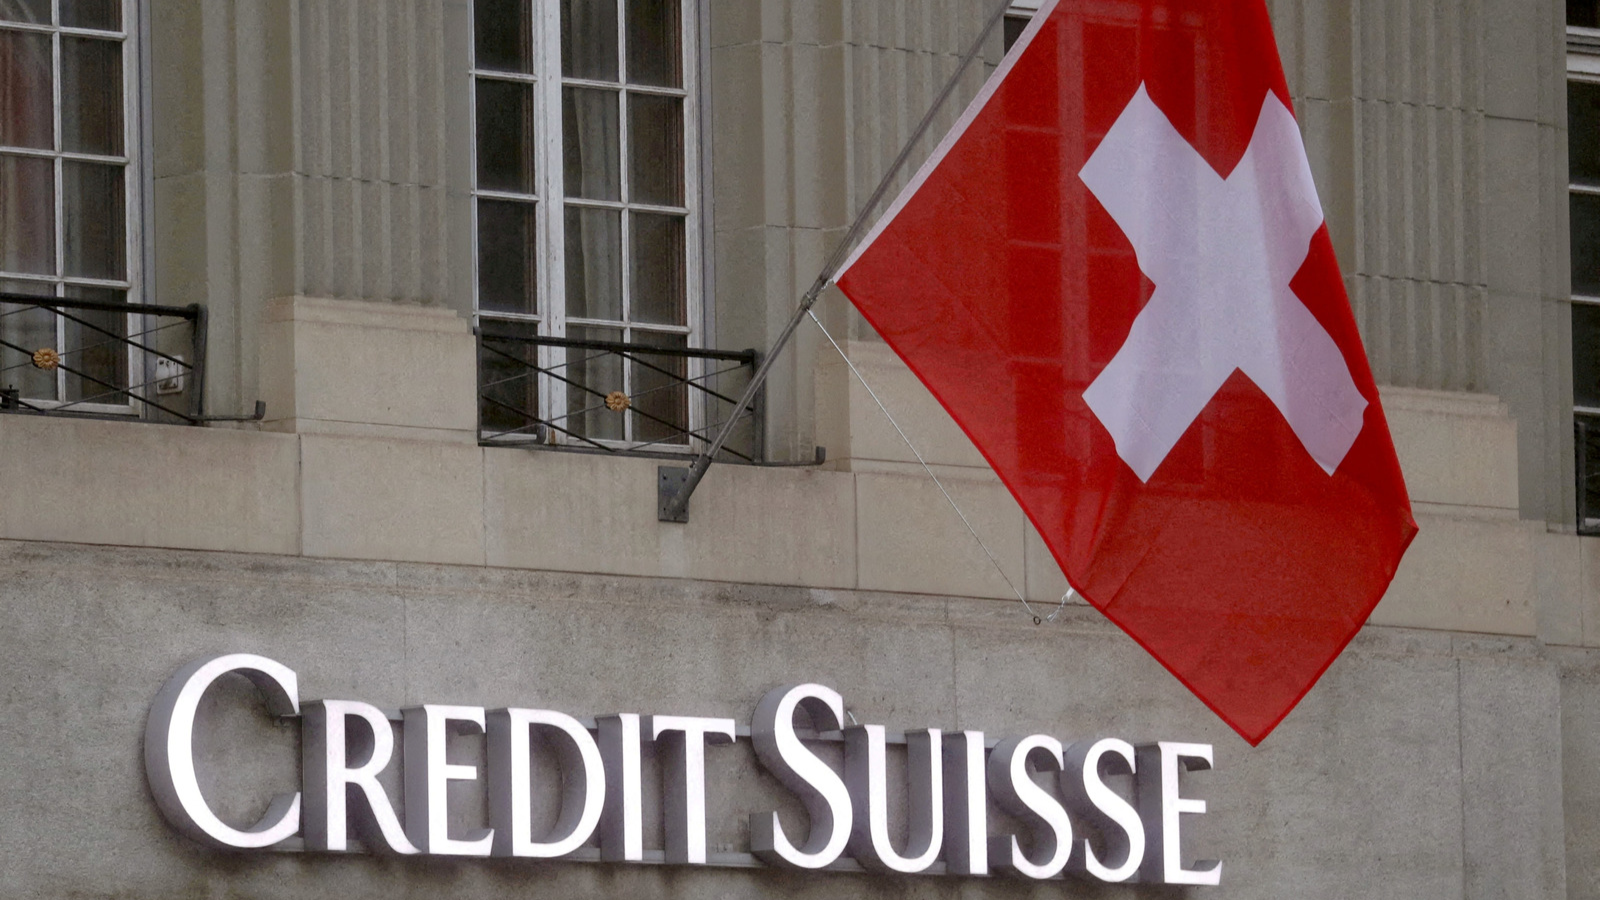 In March, Swiss banking giant UBS bought Credit Suisse for $3.25 billion to save the country's second largest bank from collapse./Reuters/Pierre Albouy